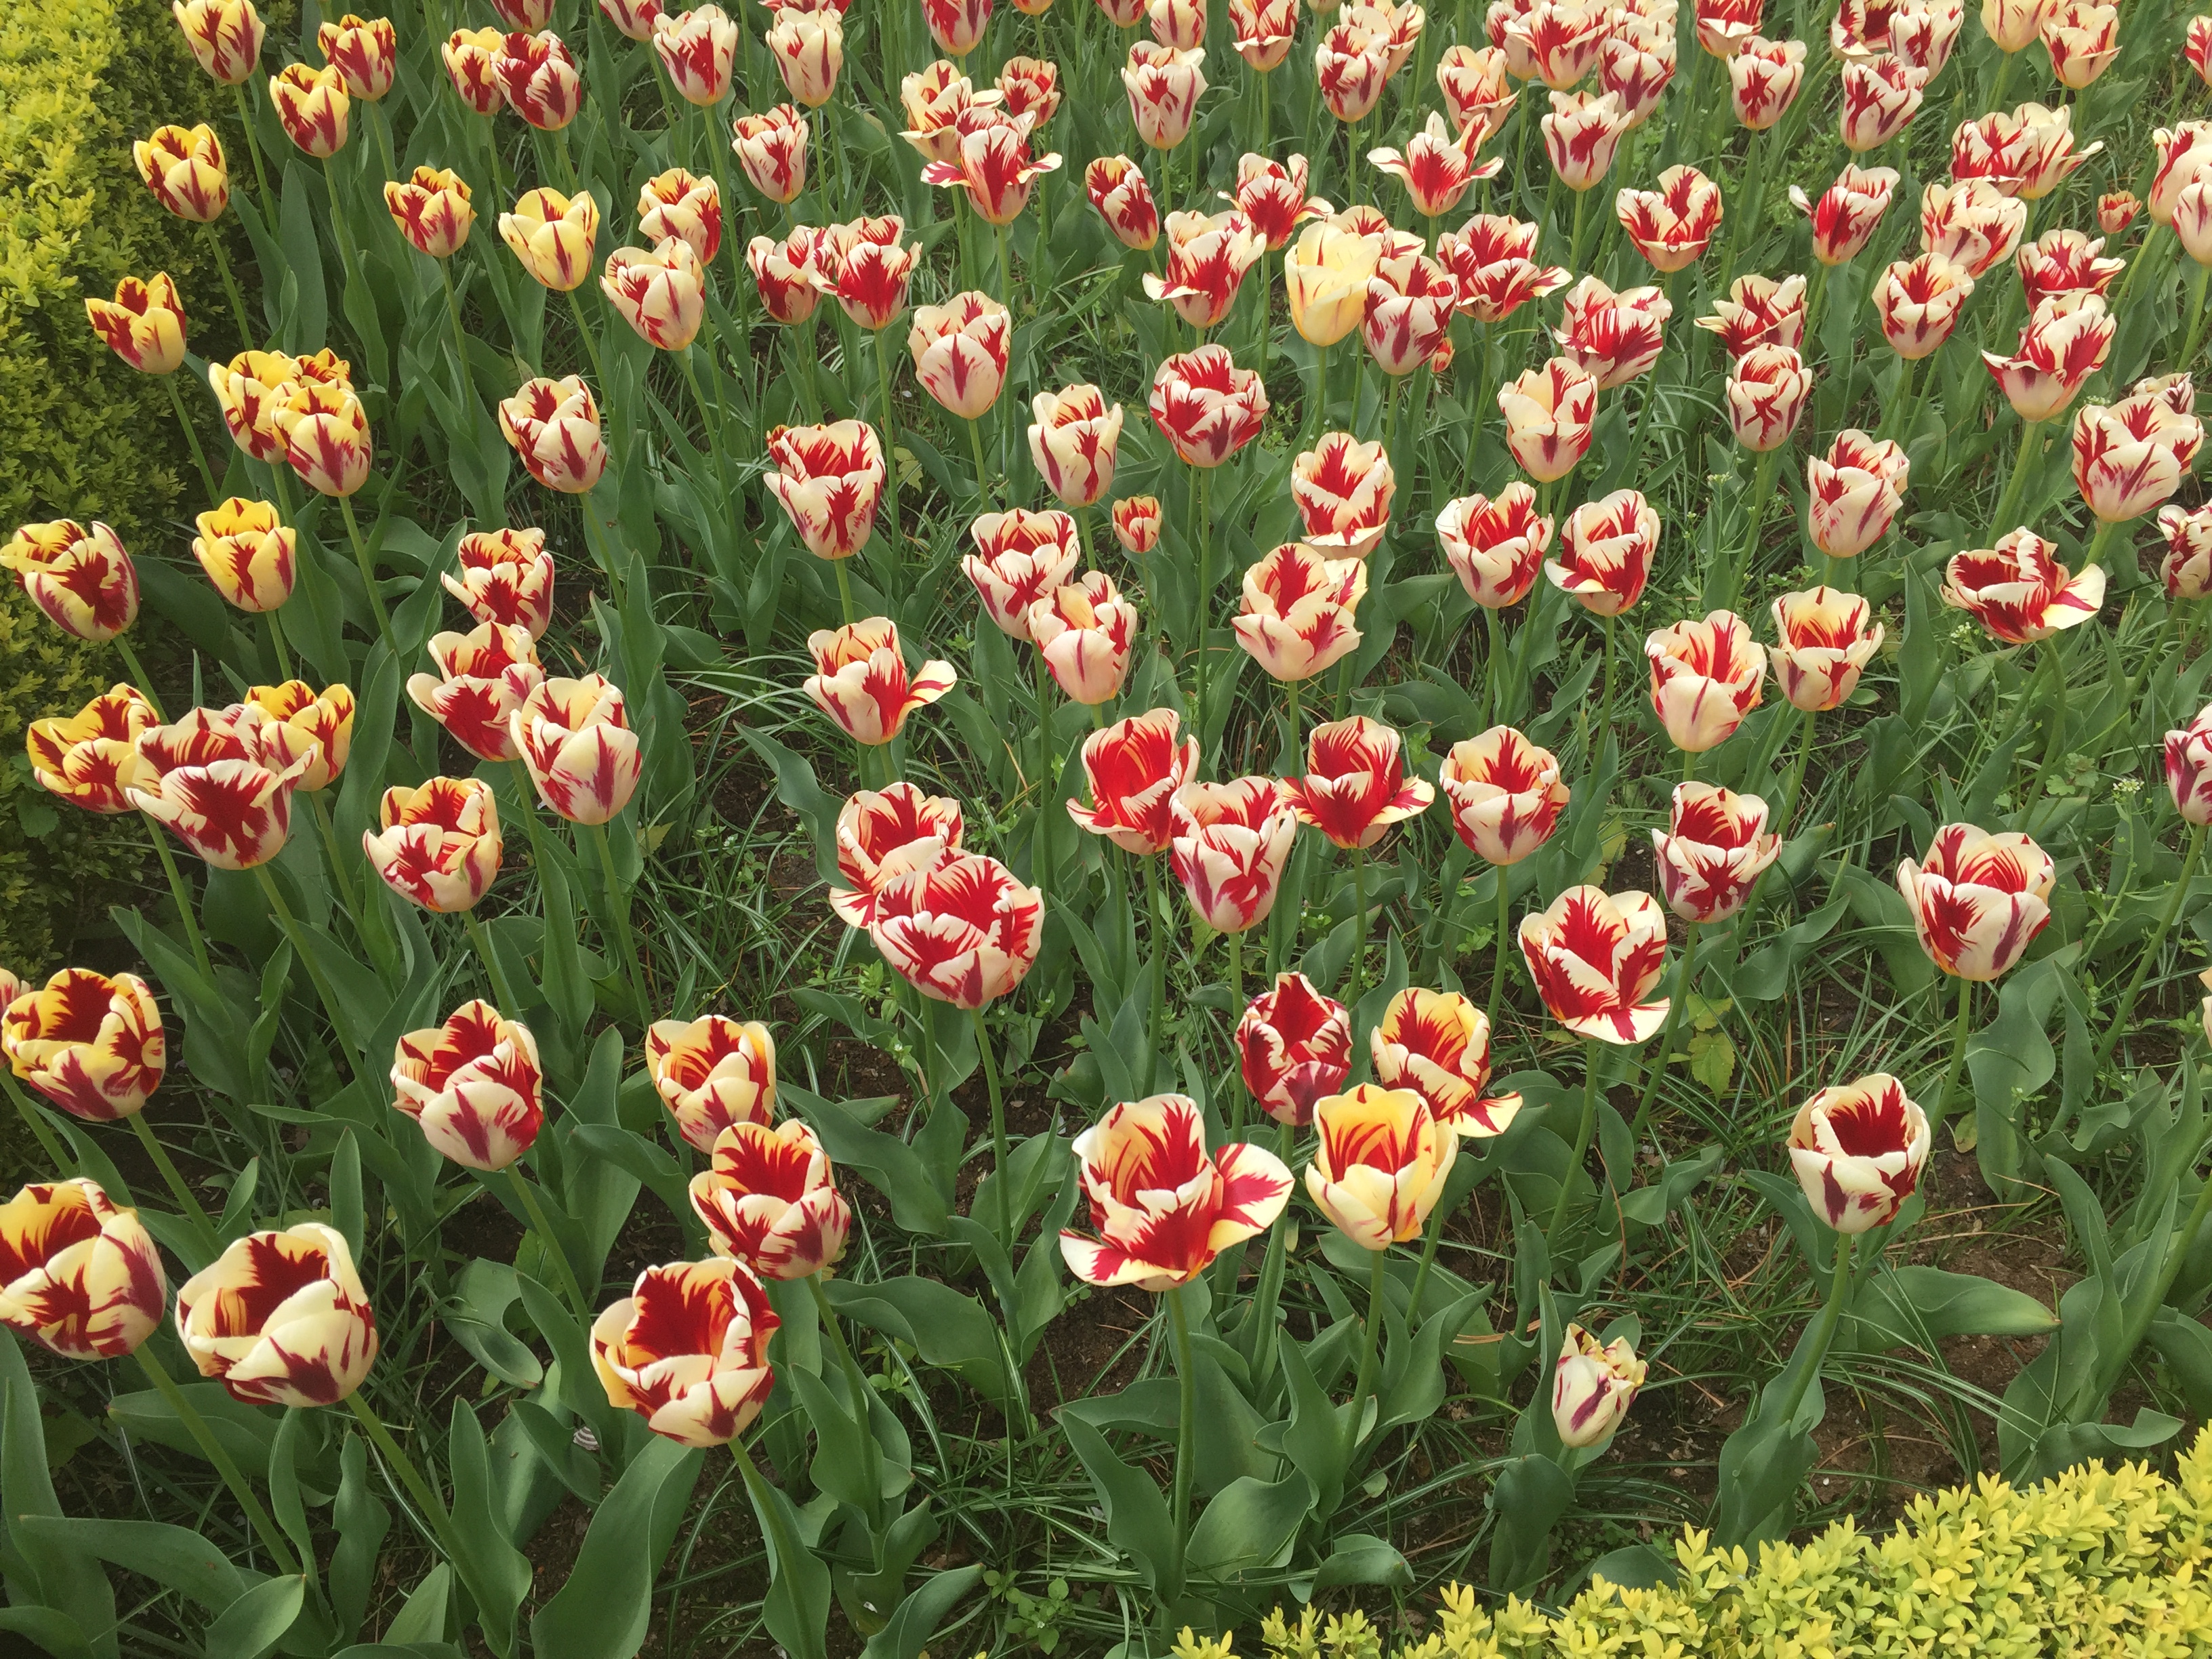 Some red and white tulips with some hints of yellow